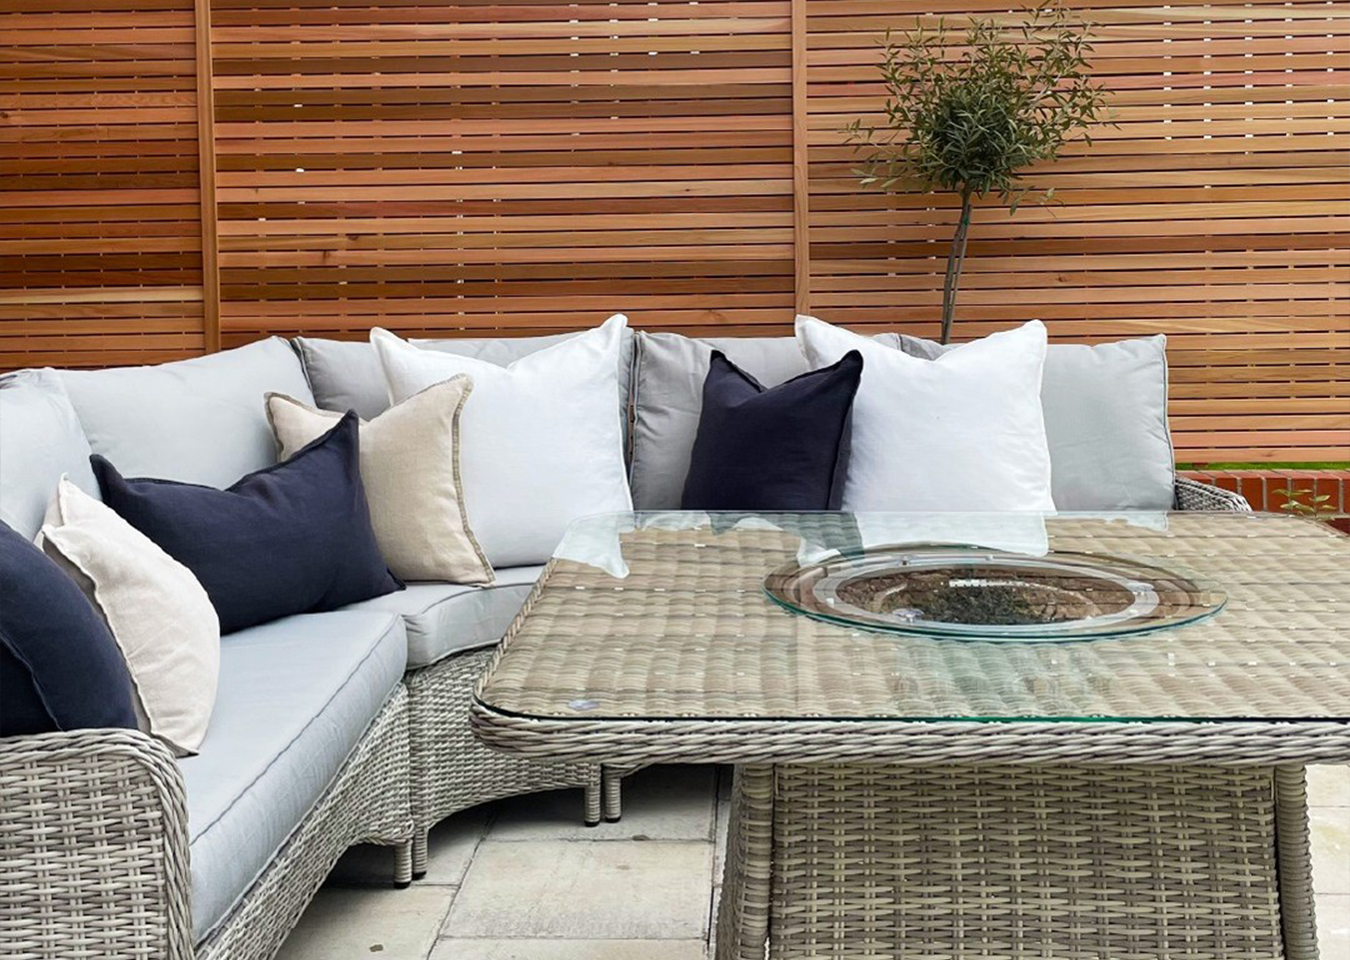 Cedar Slatted Panels behind outdoor lounge and seating area. Grey sofas with cushions